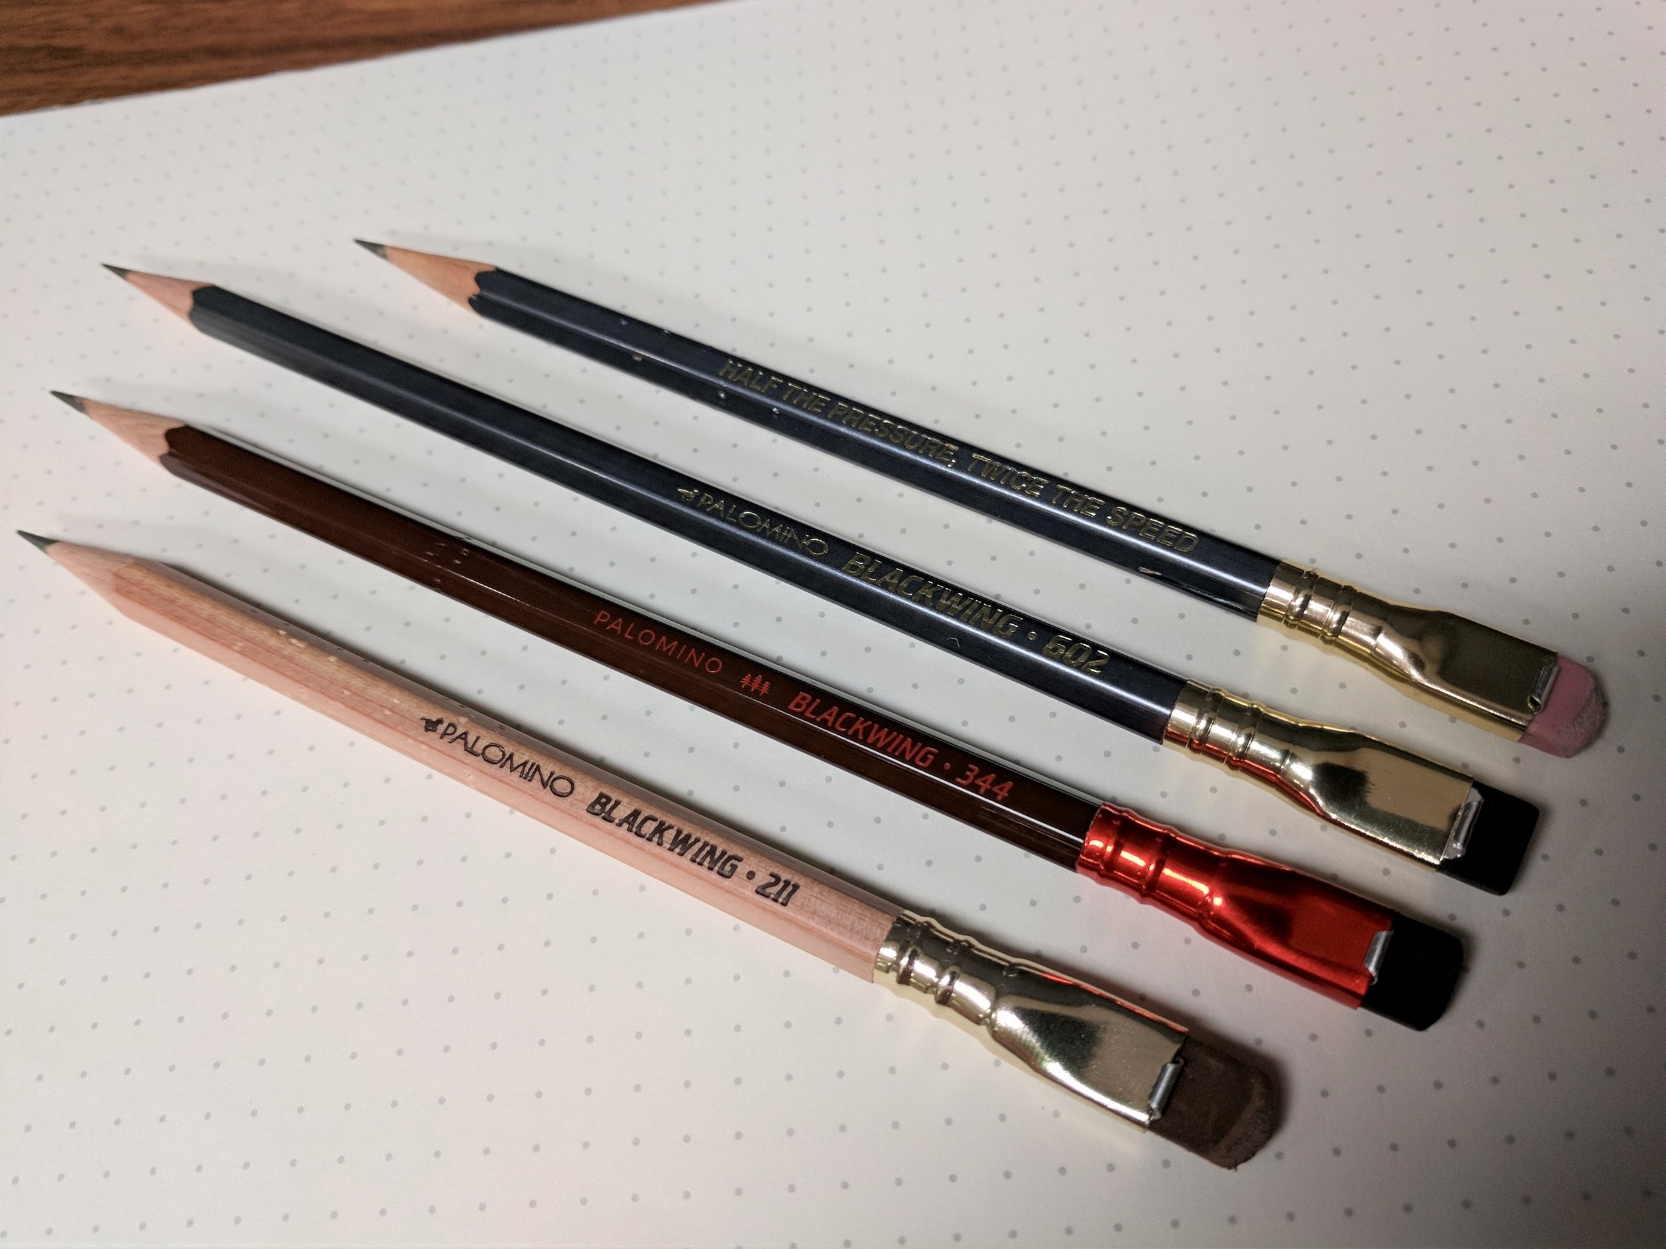 Pencil Review: A Taste of Blackwing Sampler Set - The Well